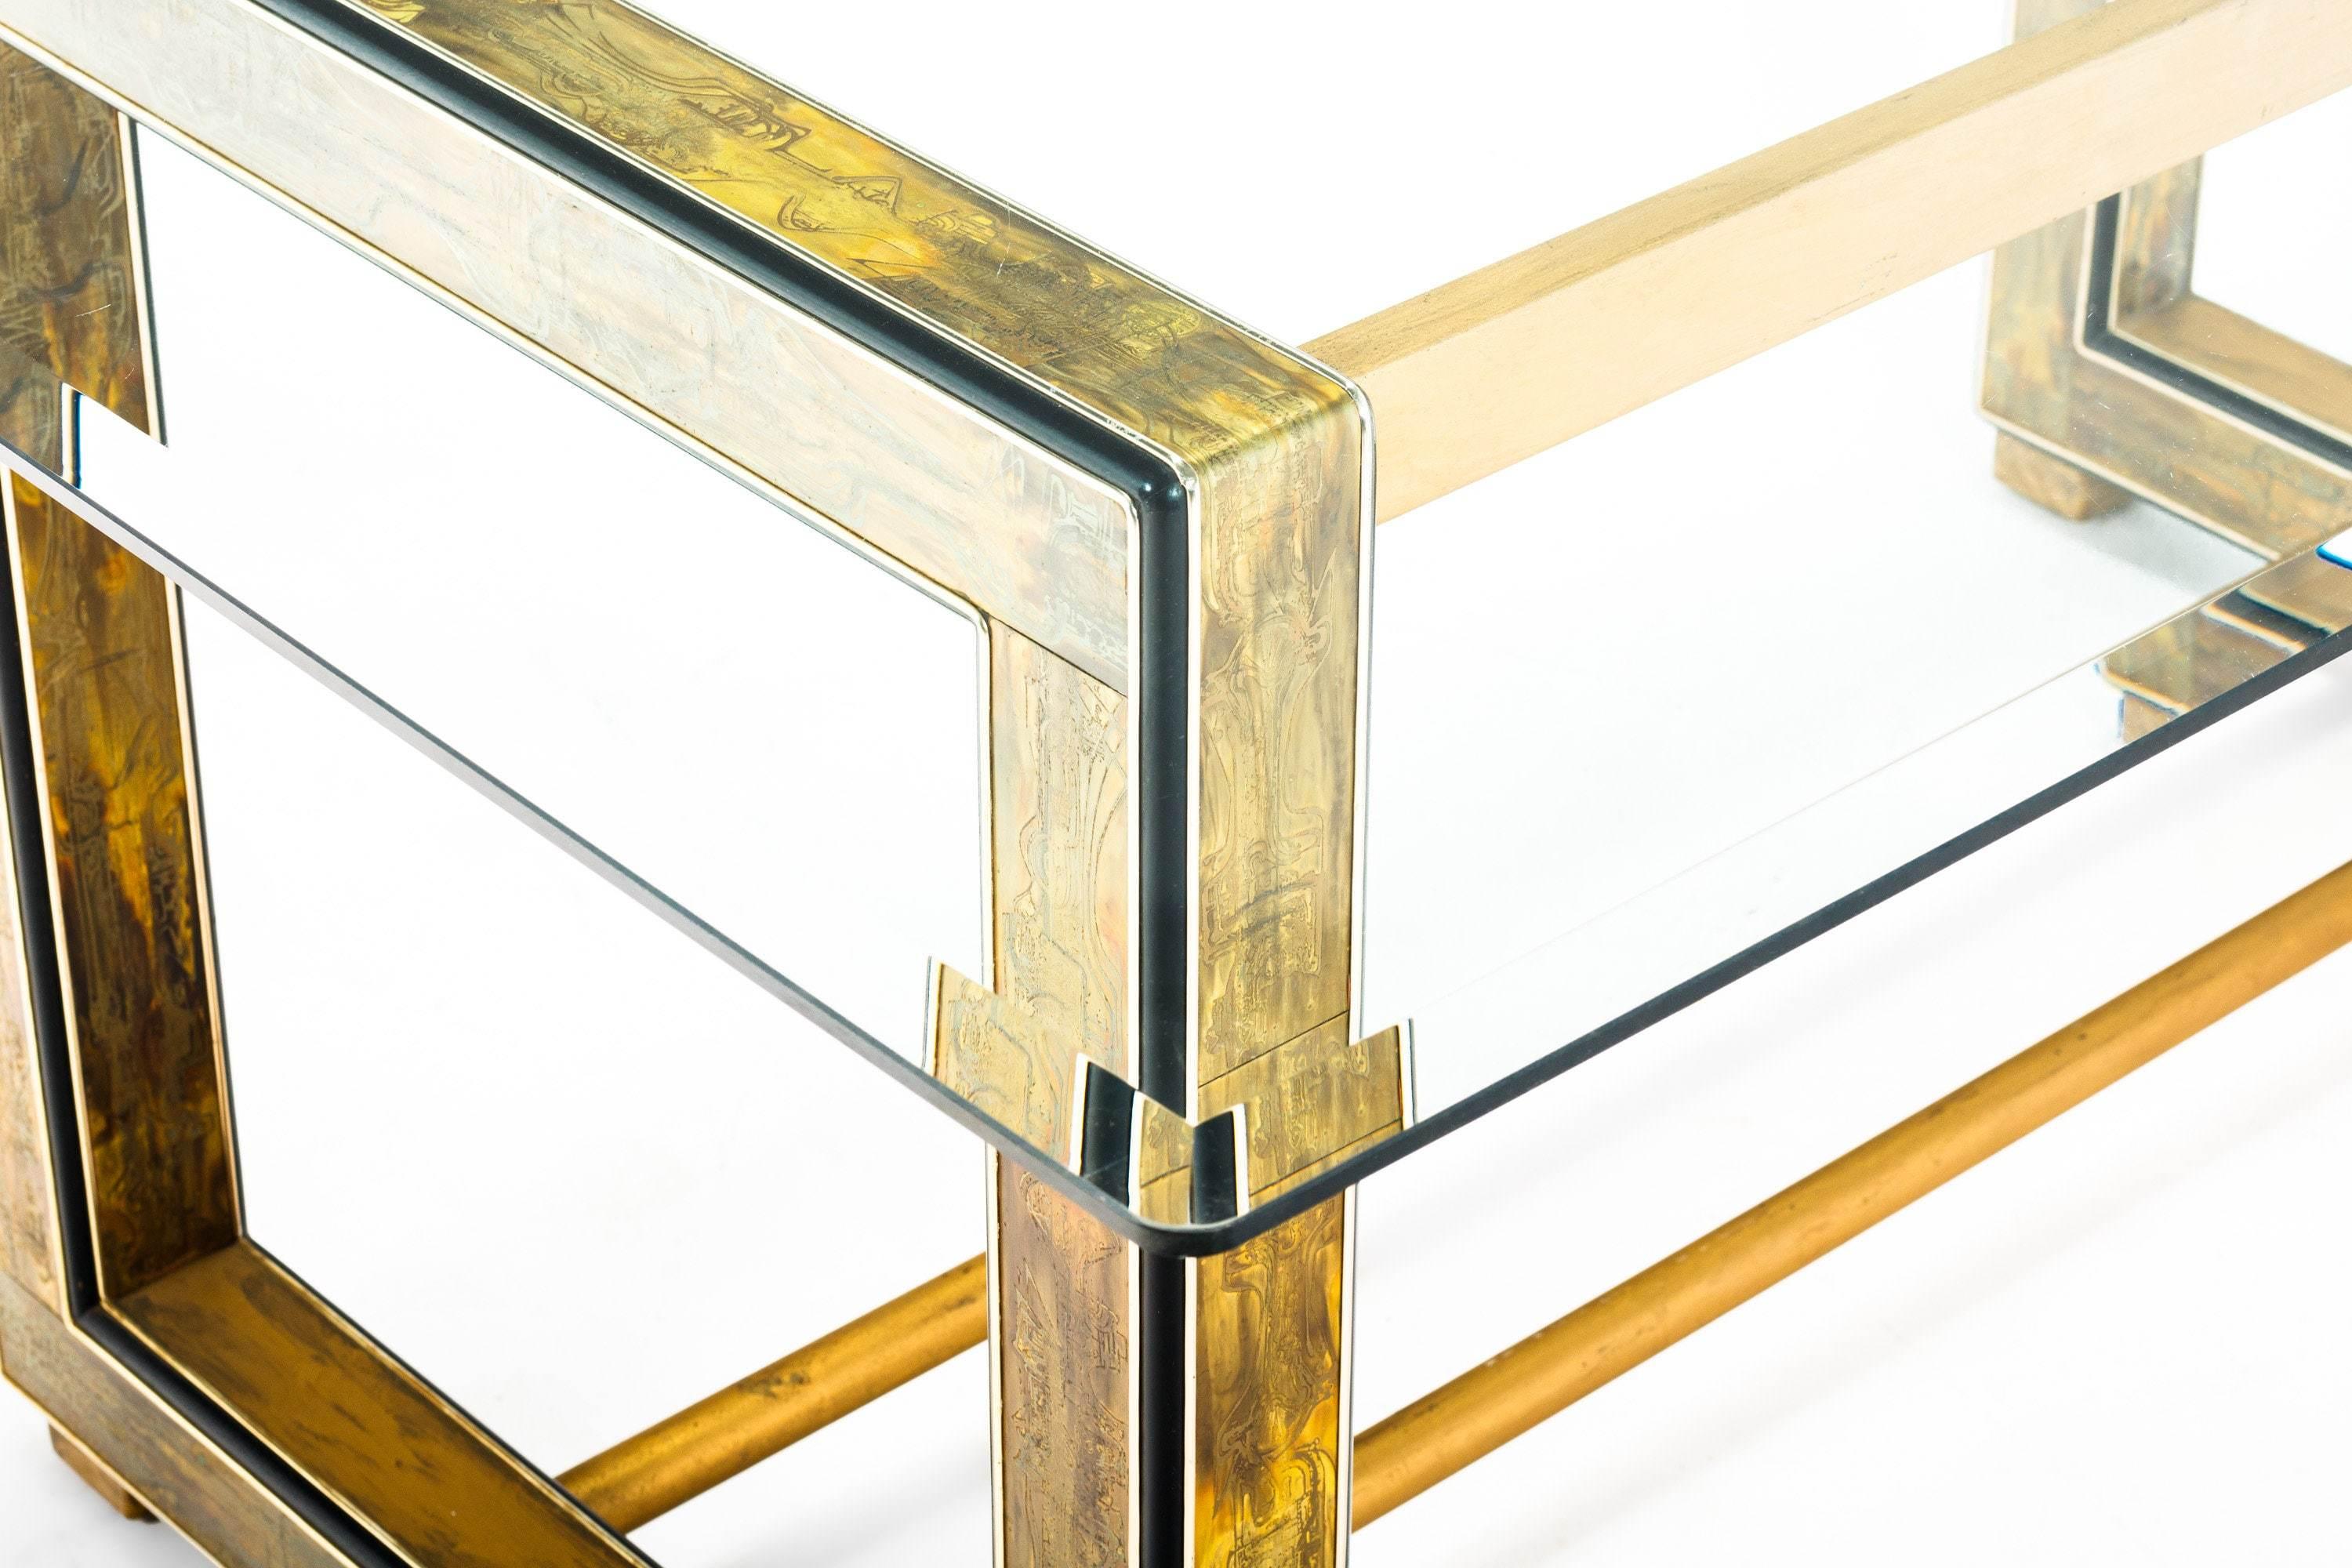 Bernhard Rohne for Mastercraft Acid-Etched Brass Dining Table, c. 1970s For Sale 1